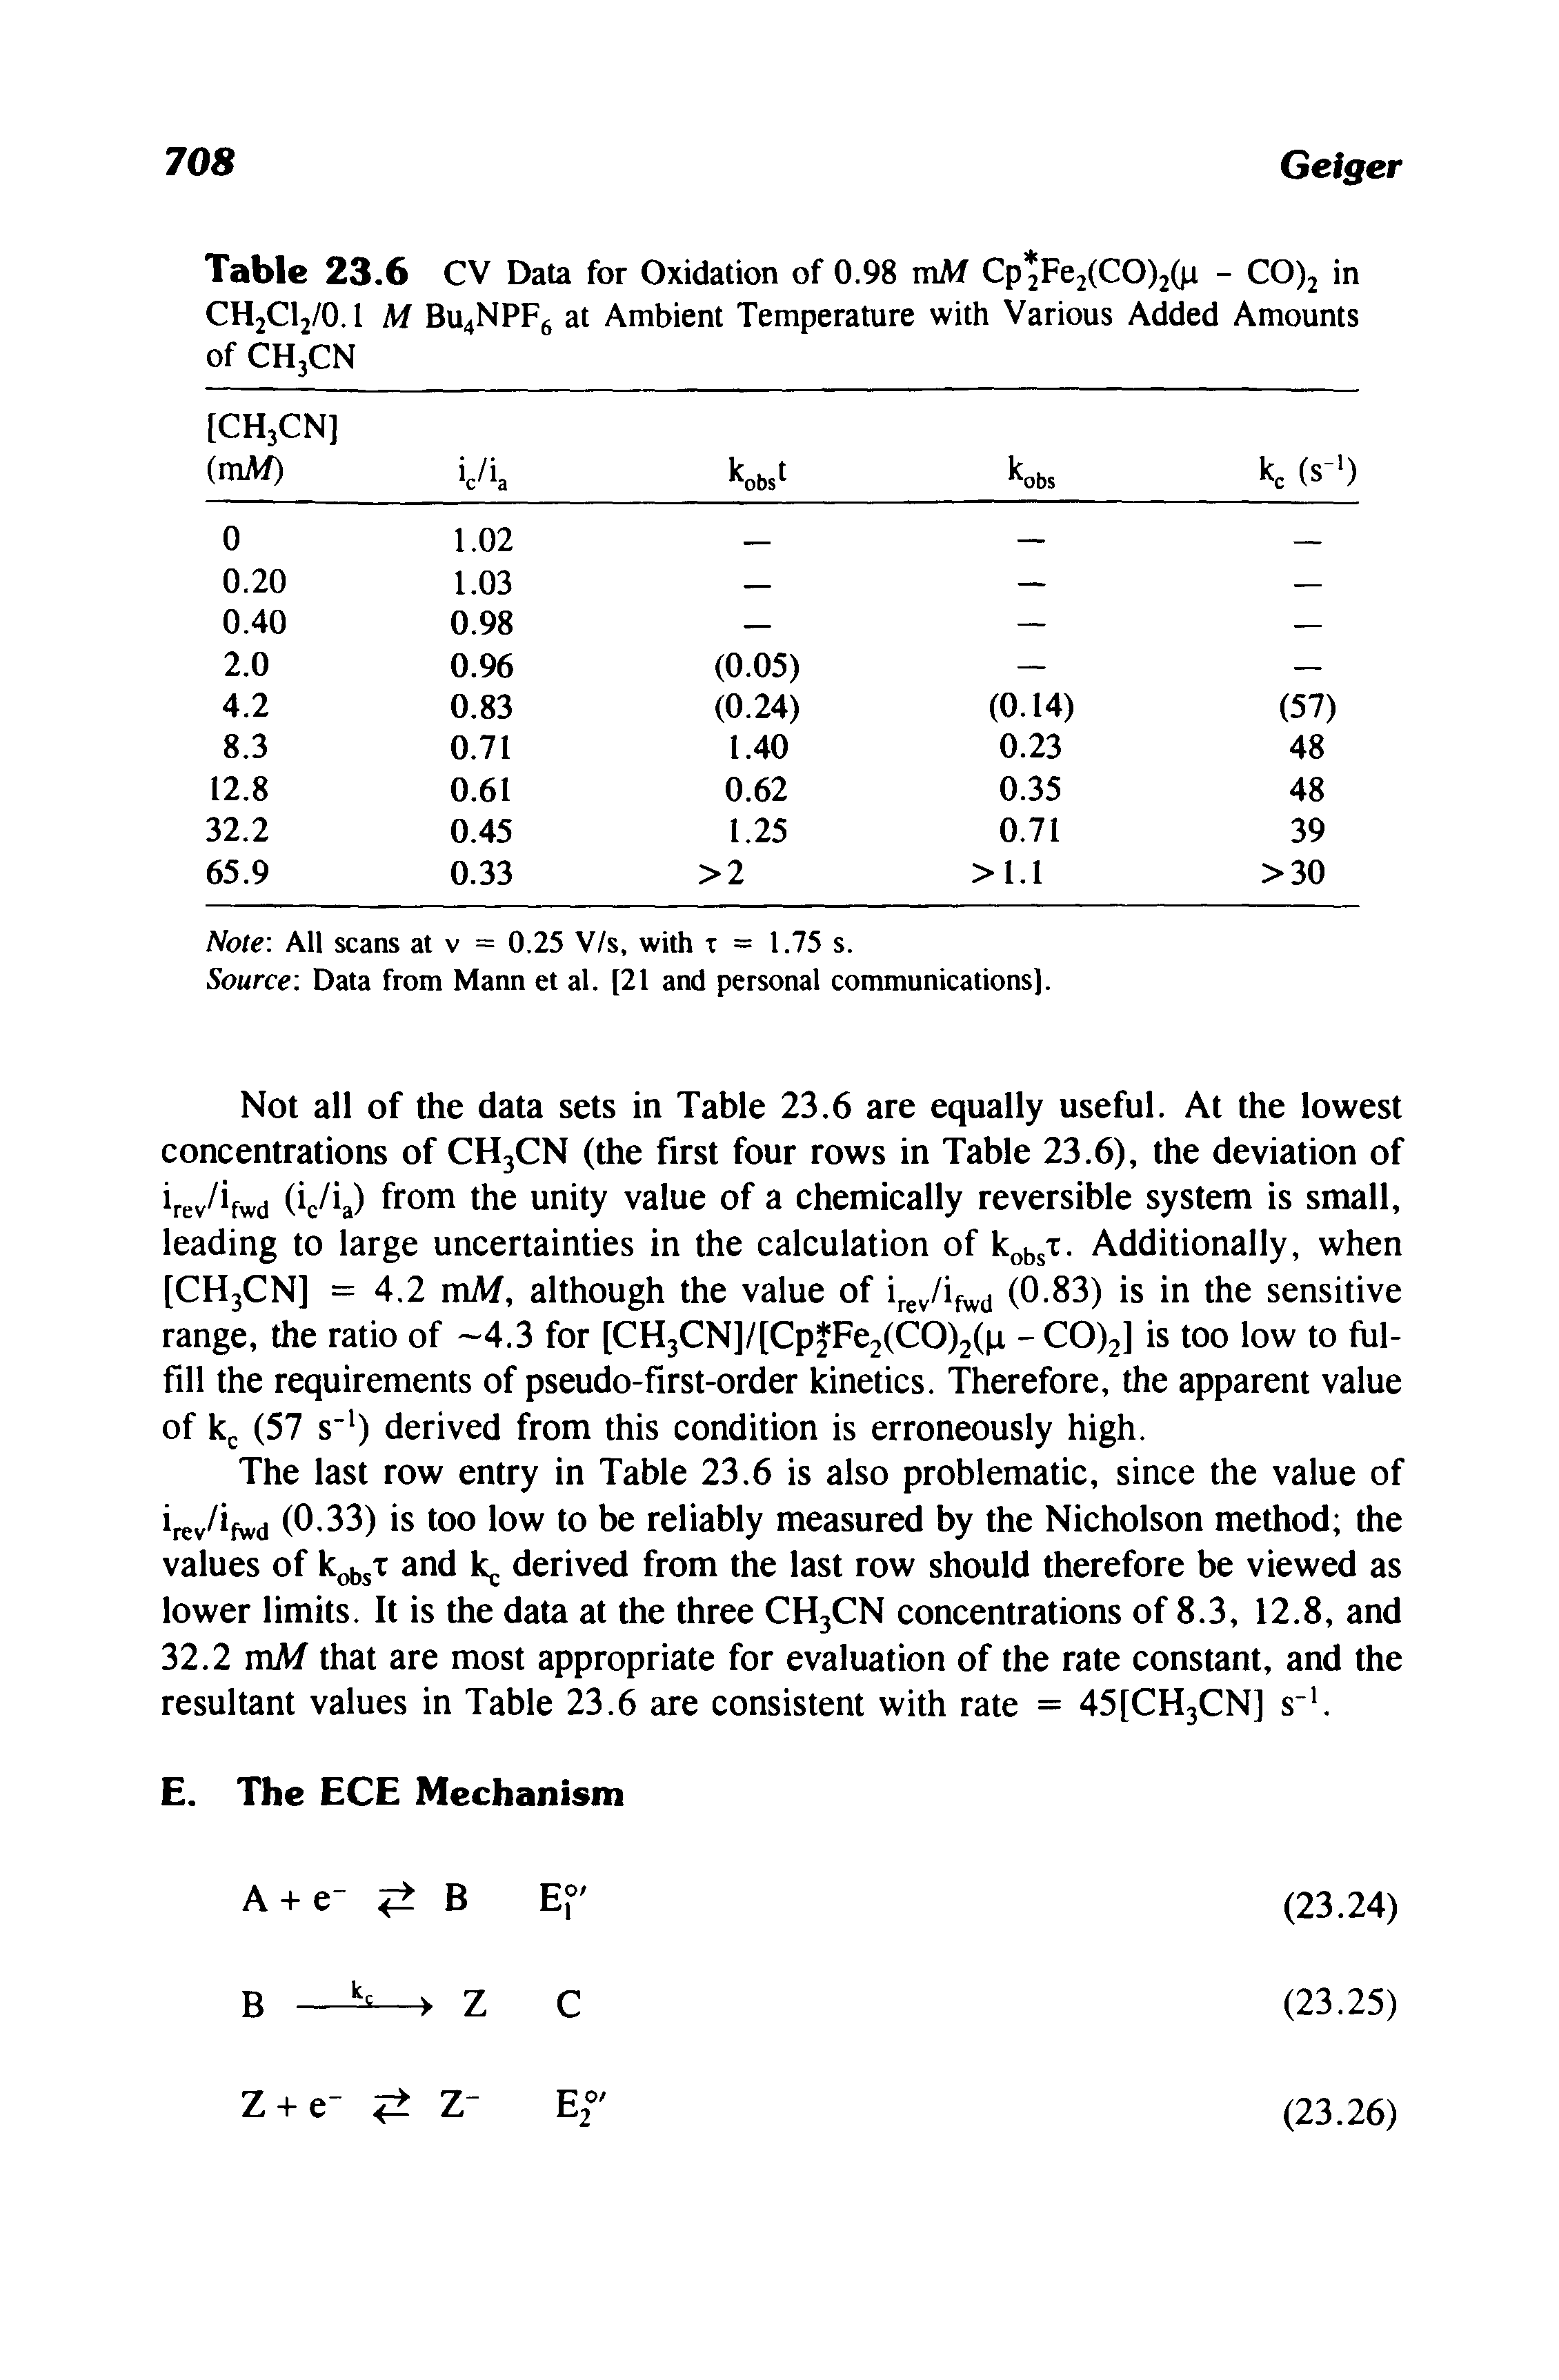 Table 23.6 CV Data for Oxidation of 0.98 mM Cp Fe2(CO)2(p - CO)2 in CH2Cl2/0.1 M Bu4NPF6 at Ambient Temperature with Various Added Amounts of CH3CN...